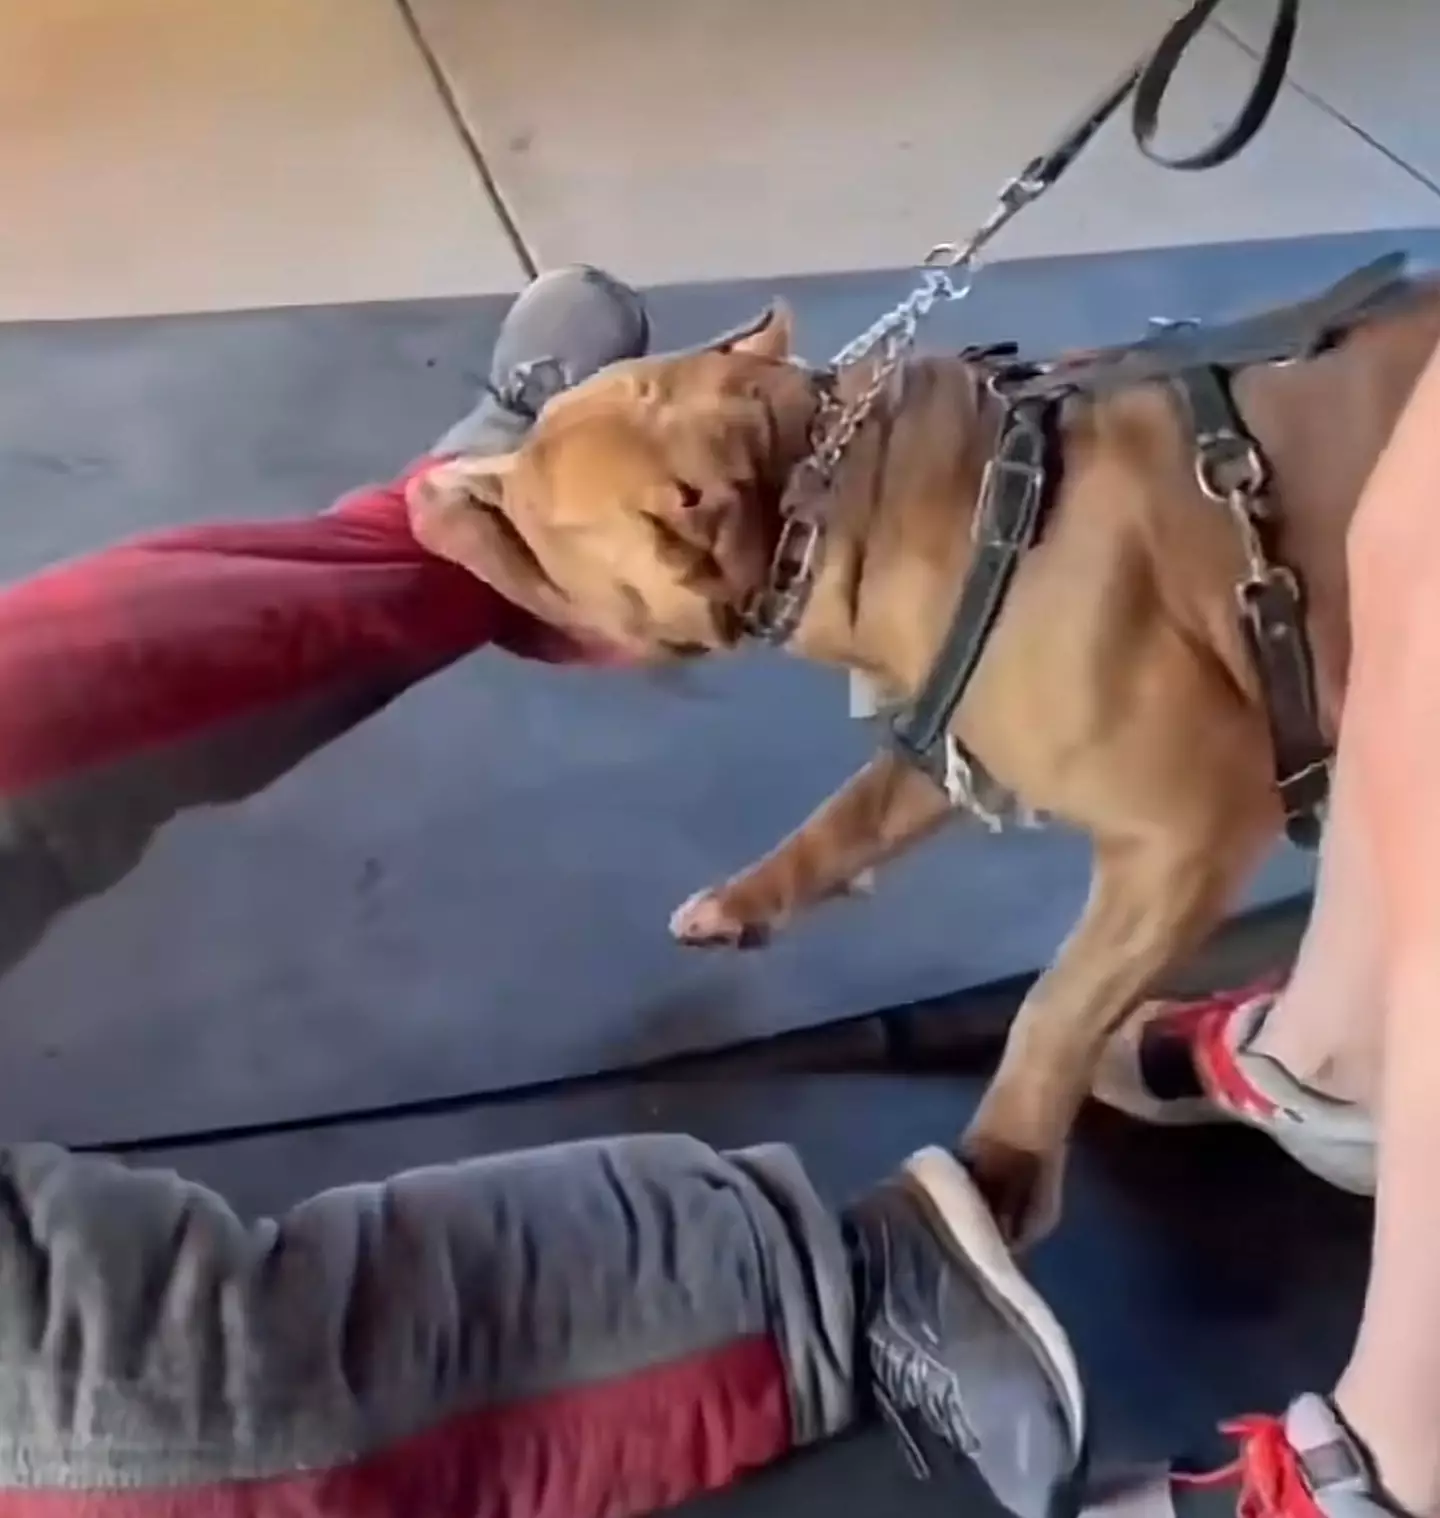 The dog latched onto the man's leg and it took a while for it to let go.